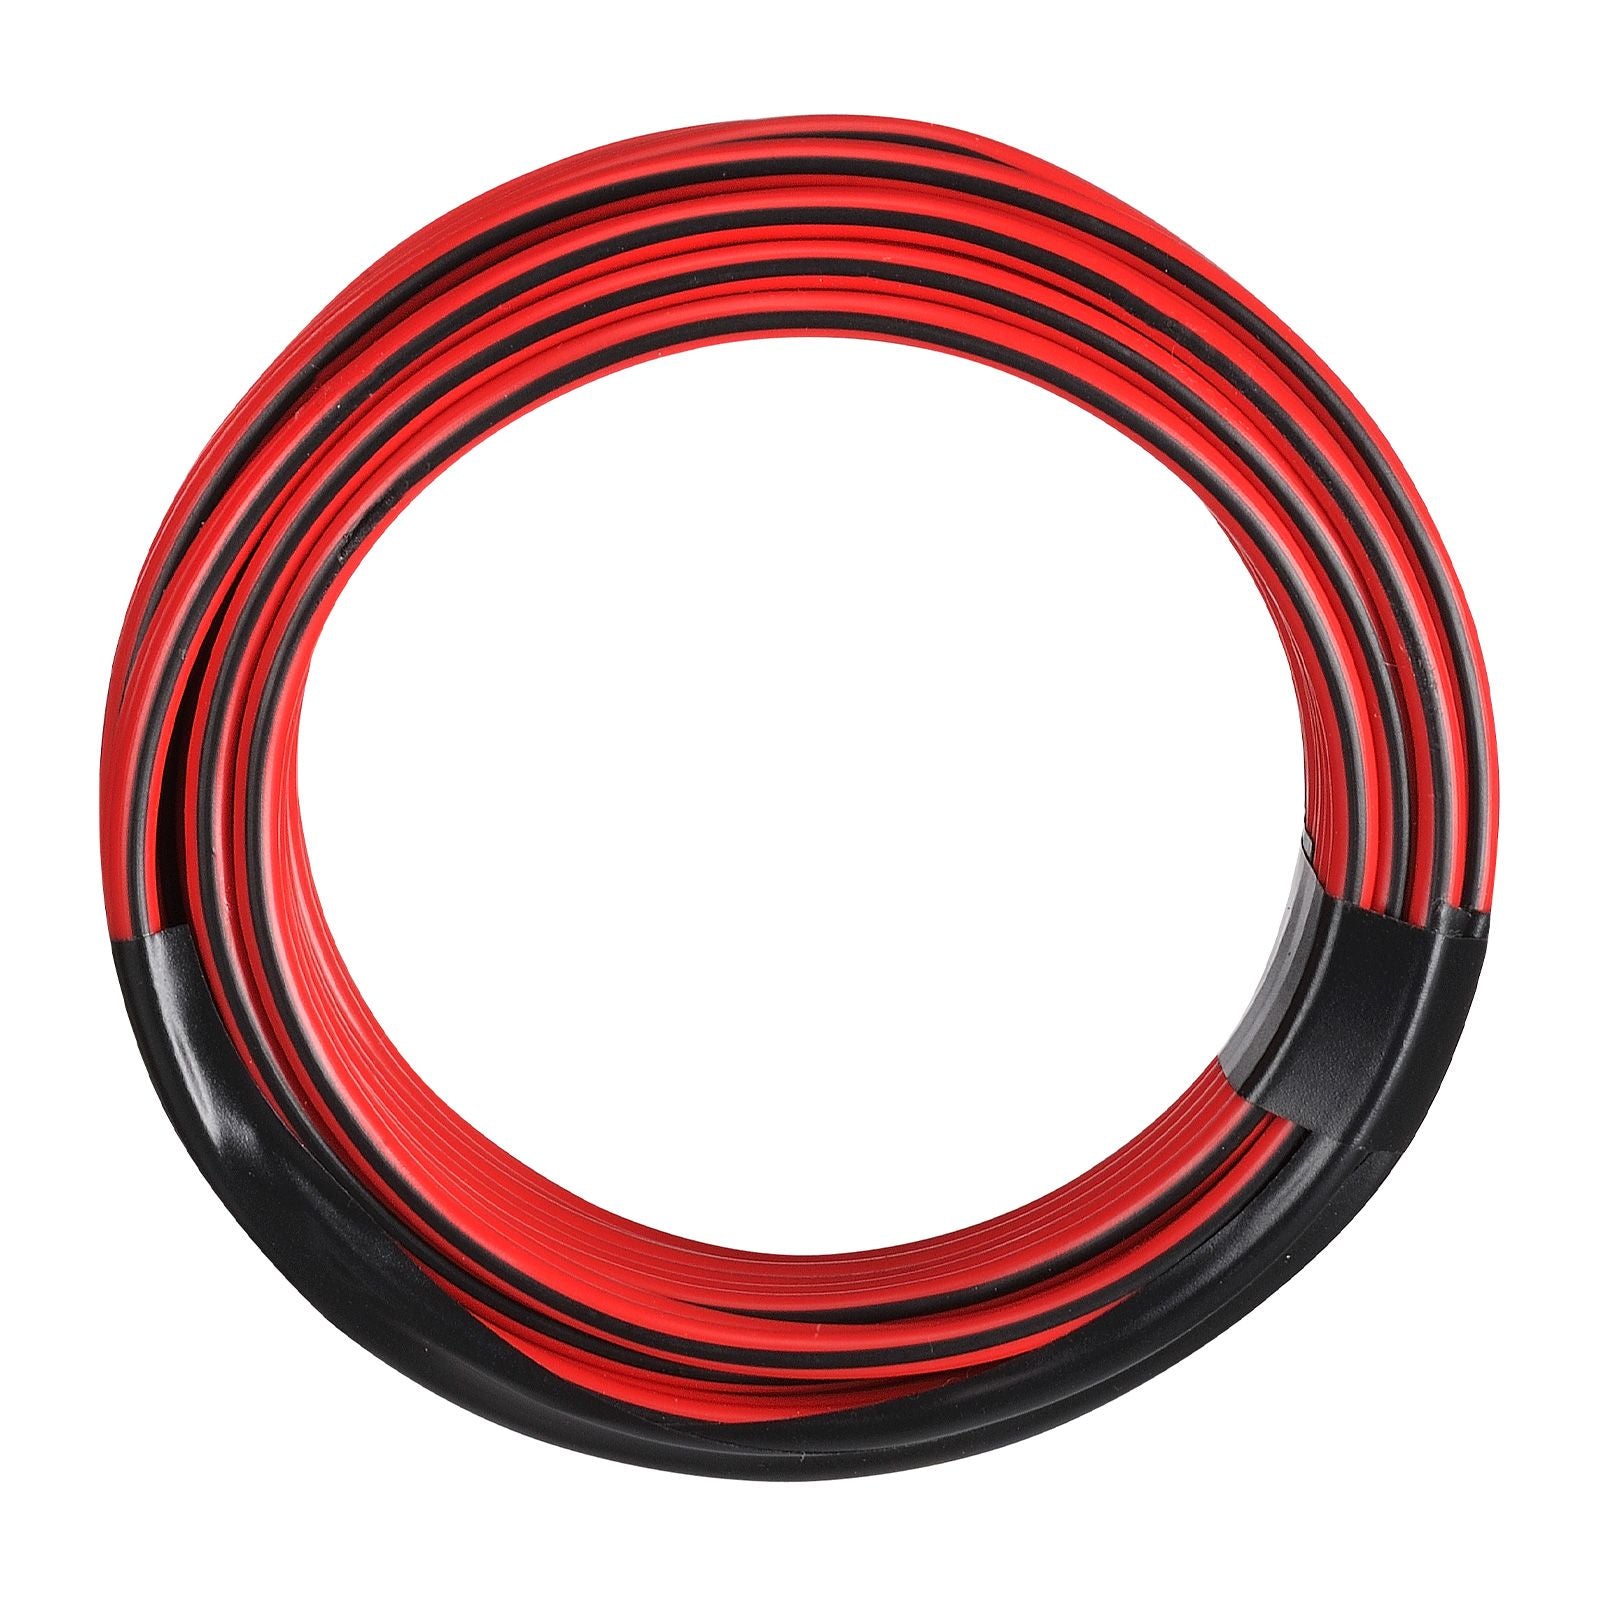 (15 AMP) 4MM TWIN CORE FIG 8 CABLE Red with Black Tracer 4 M - Trek Hardware